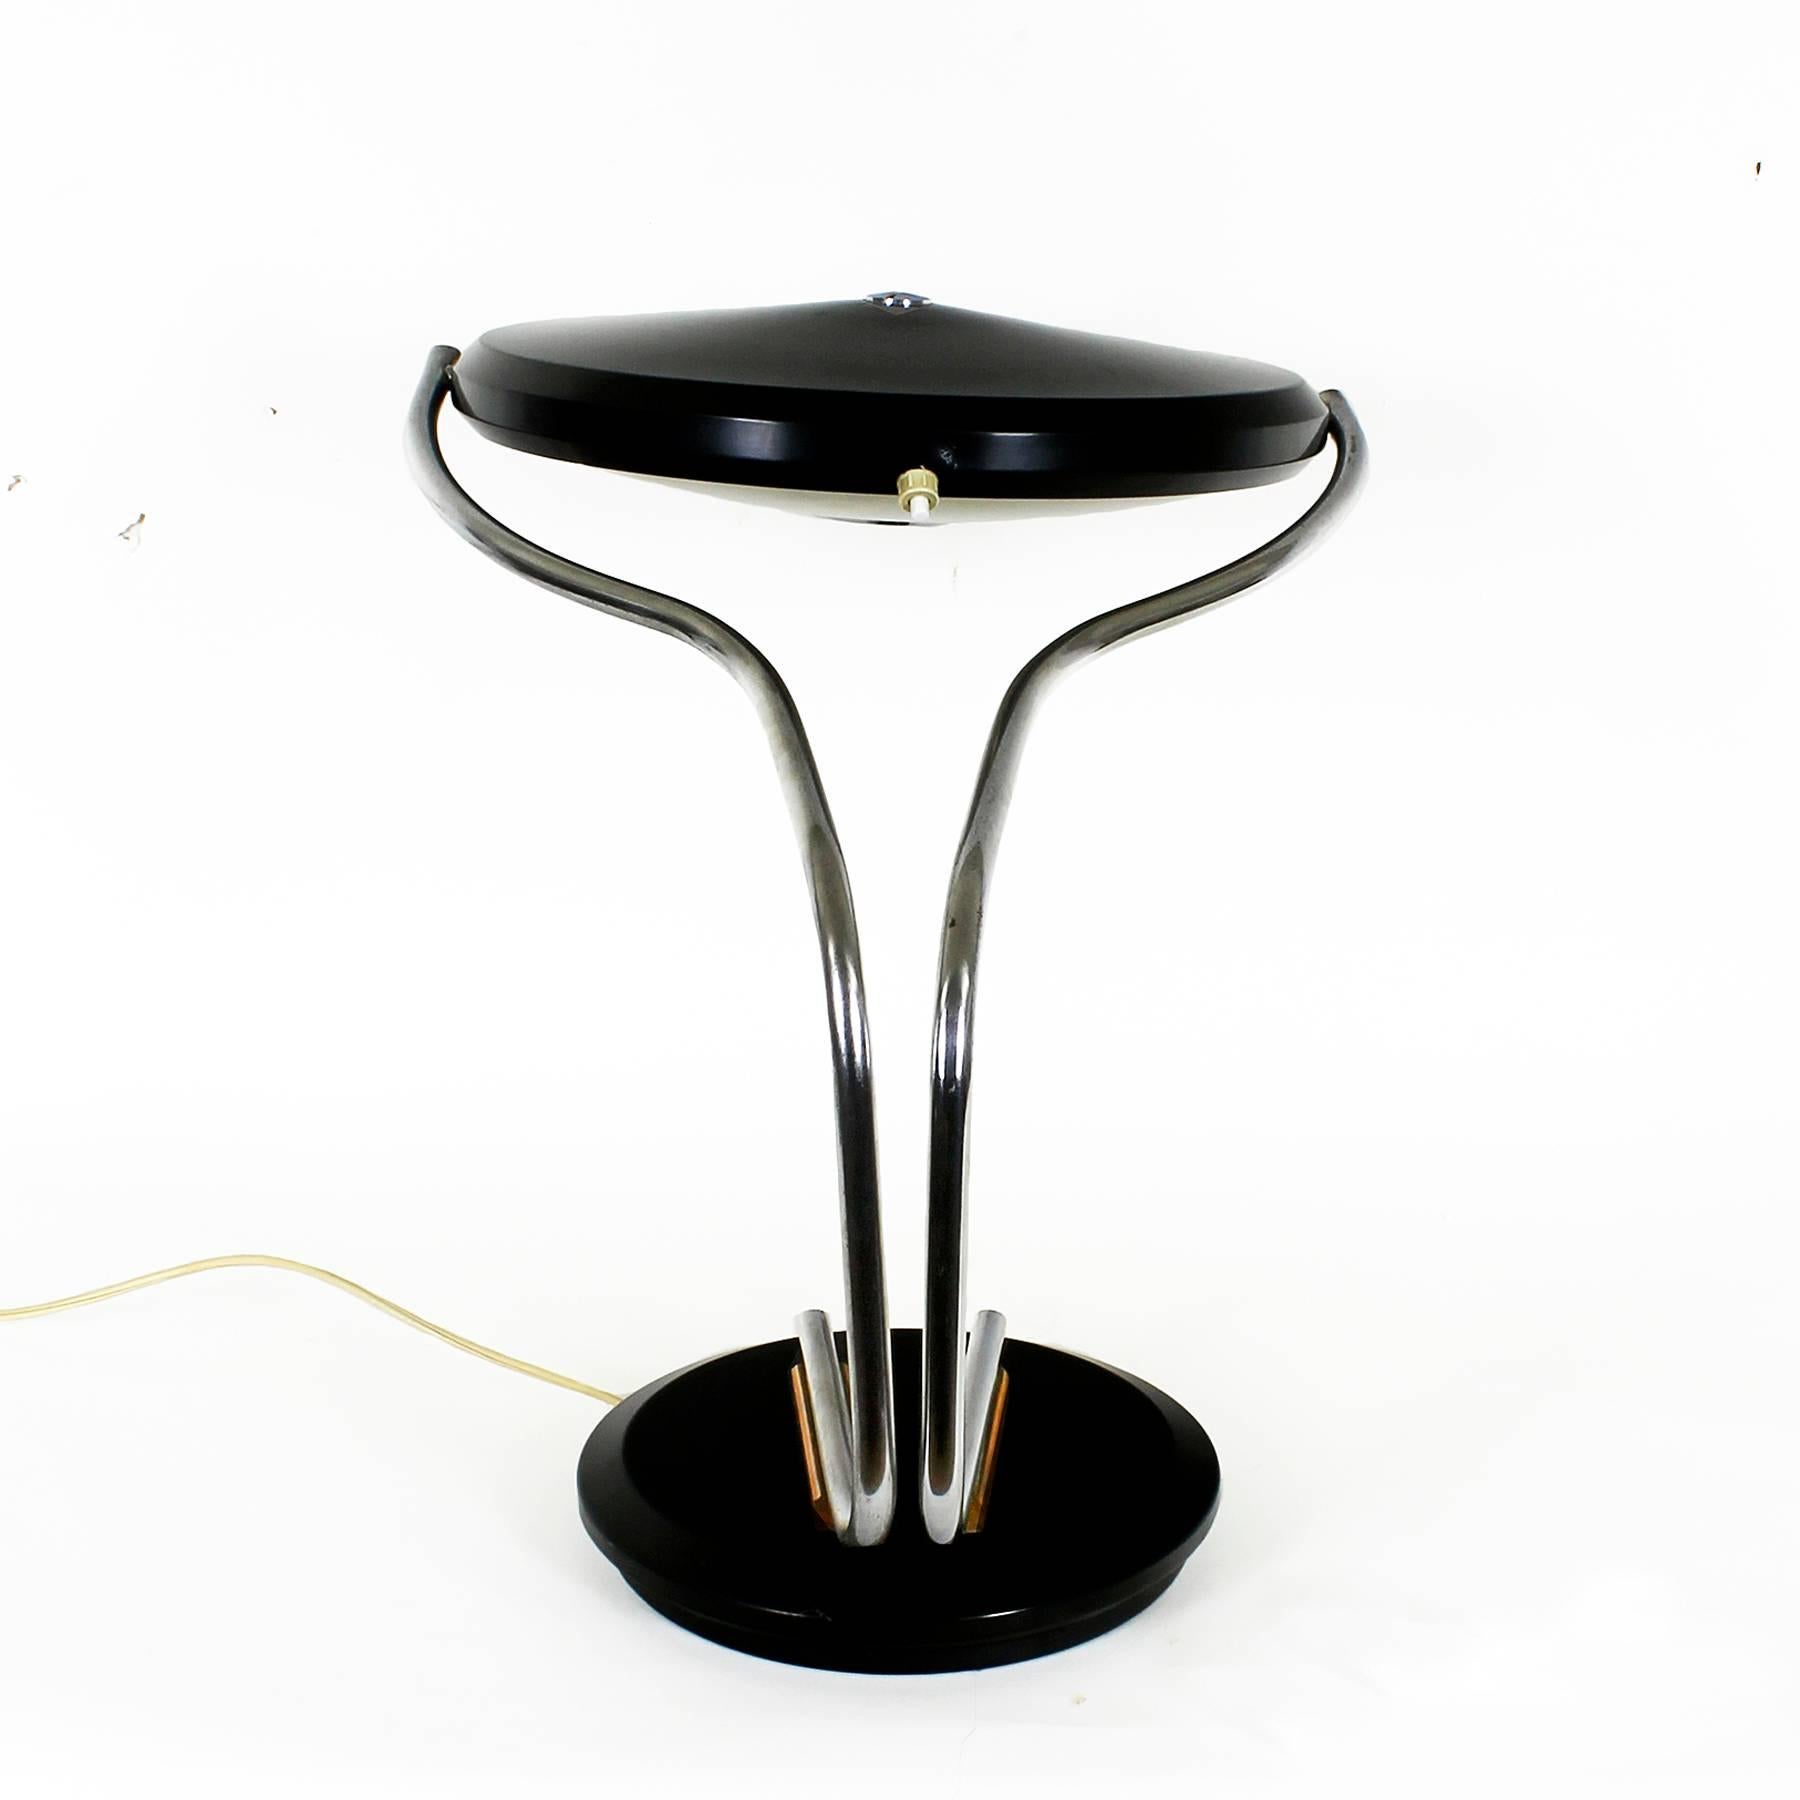 Mid-20th Century Mid-Century Modern Chrome-Plated Metal Desk Lamp by Fase - Spain For Sale